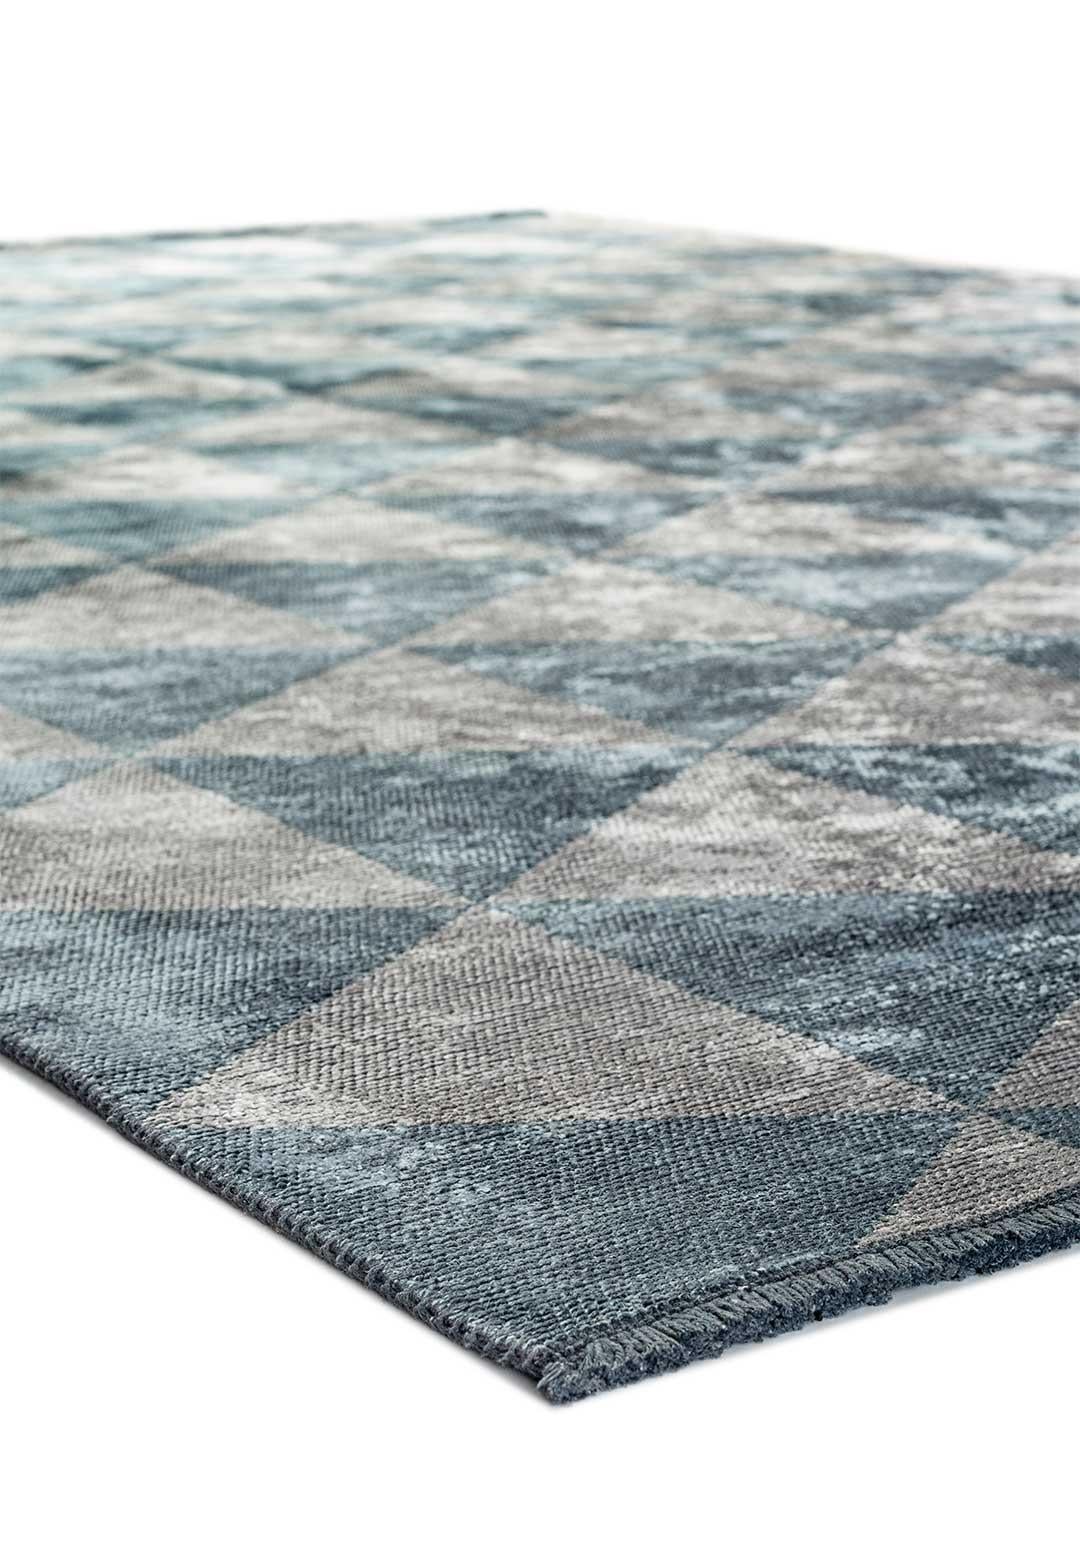 Machine-Made Silver Gray and Light Blue and Triangle Diamond Geometric Pattern Rug with Shine For Sale